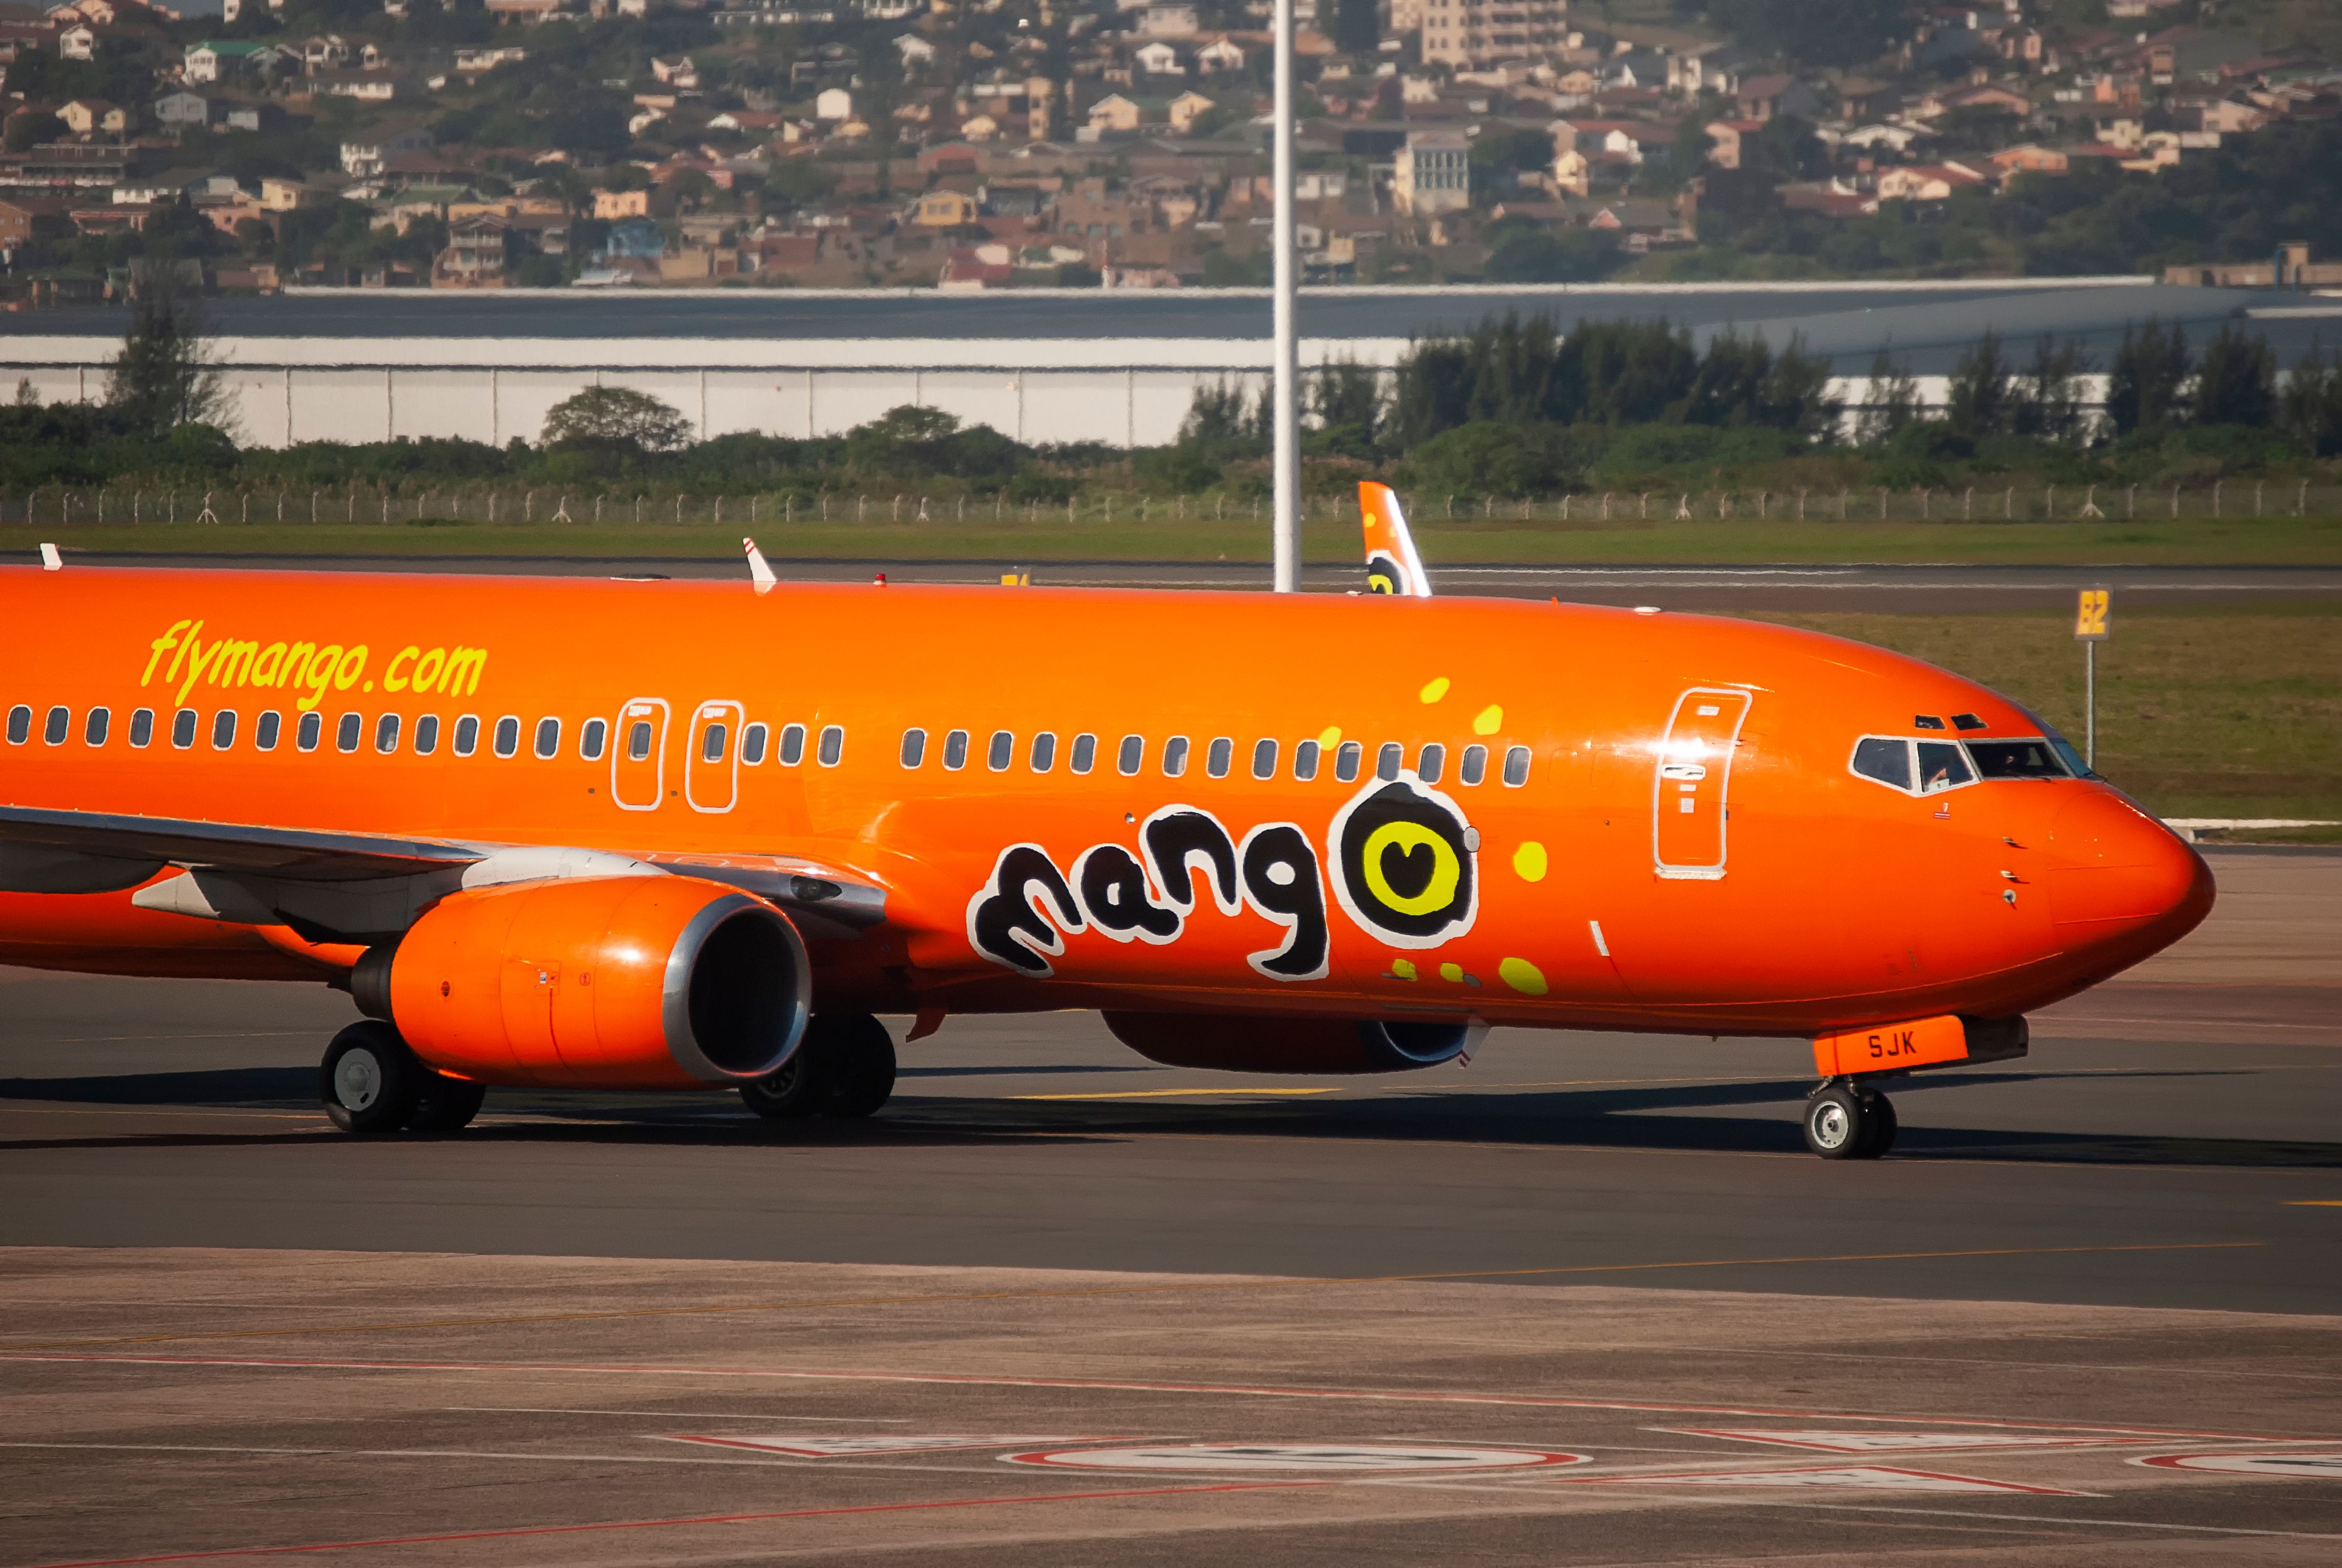 Mango Airlines at Durban Airport